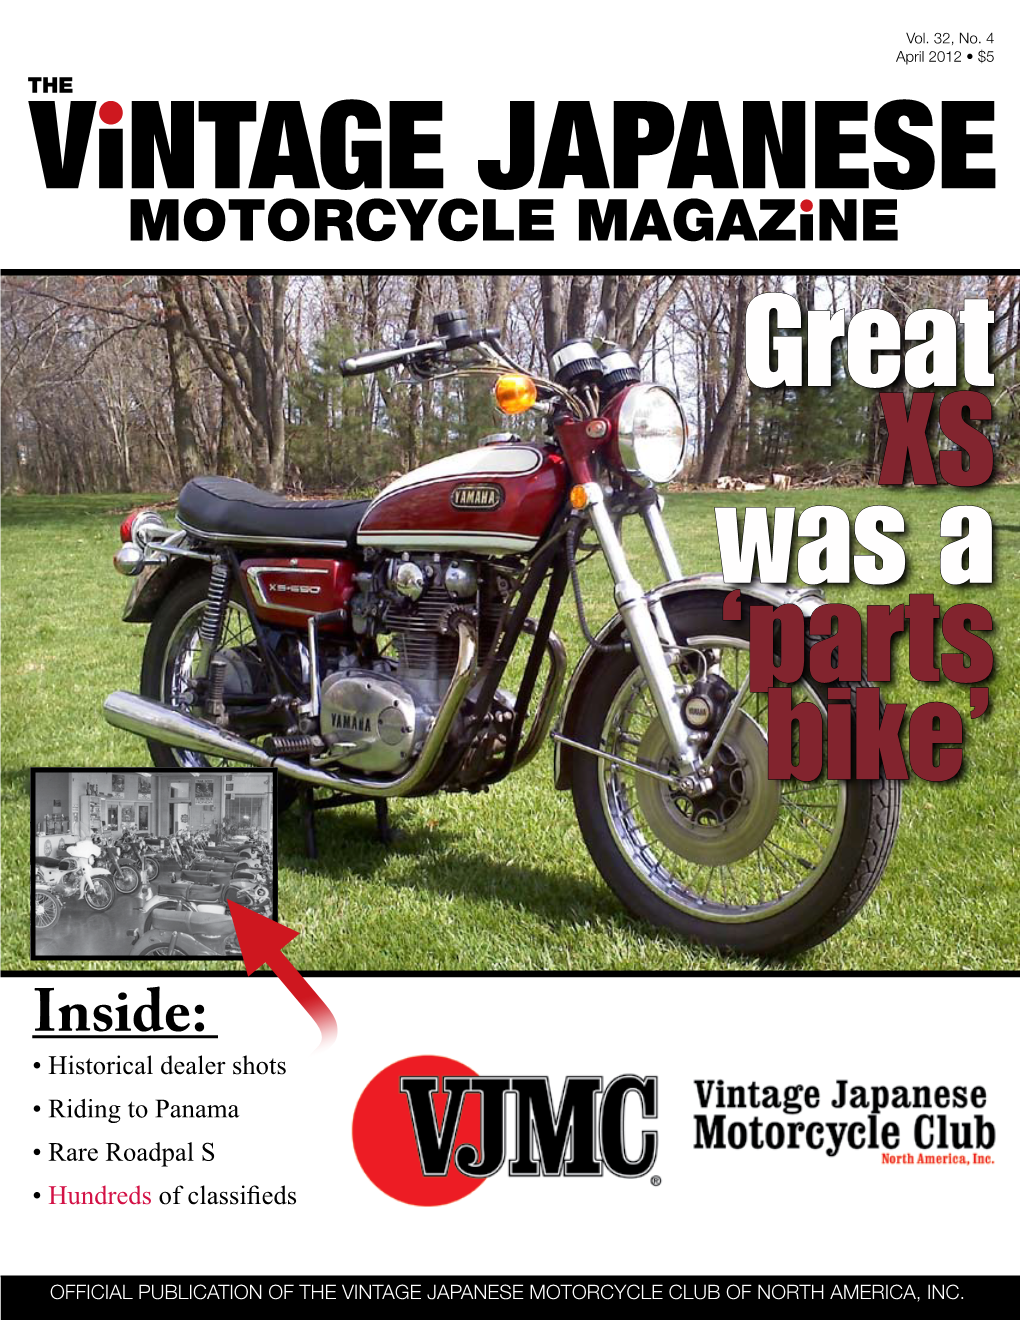 Inside: Historical Dealer Shots • Riding to Panama • Rare Roadpal S • Hundreds of Classifieds